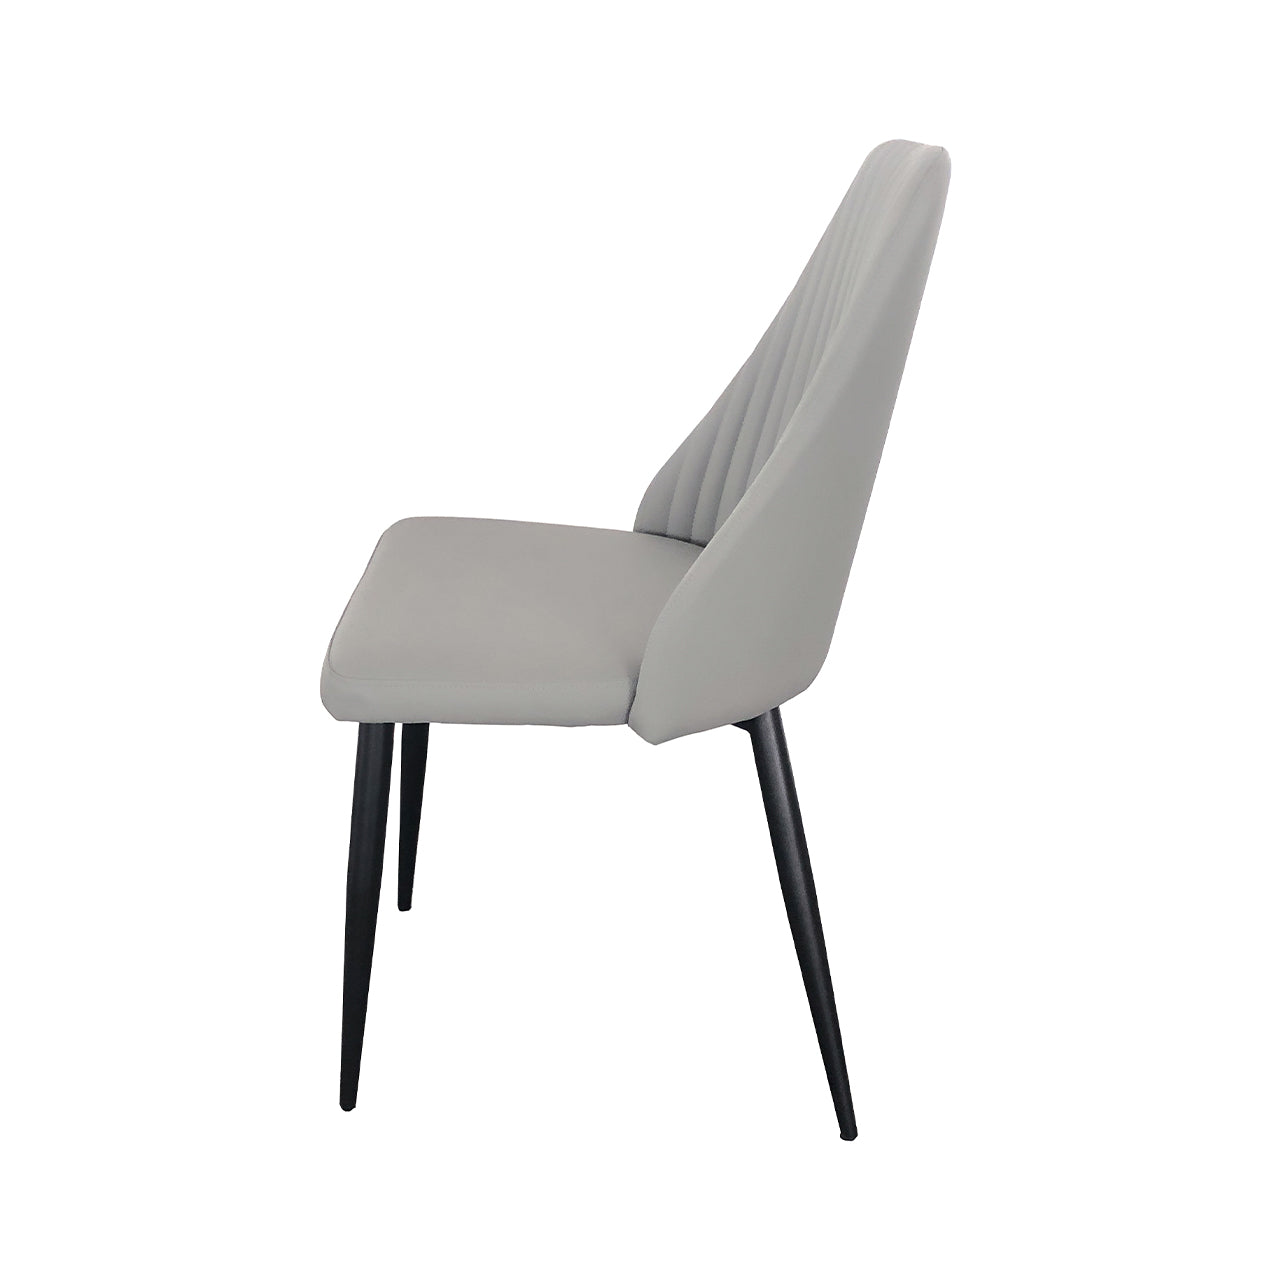 PU leather dining chair in grey color